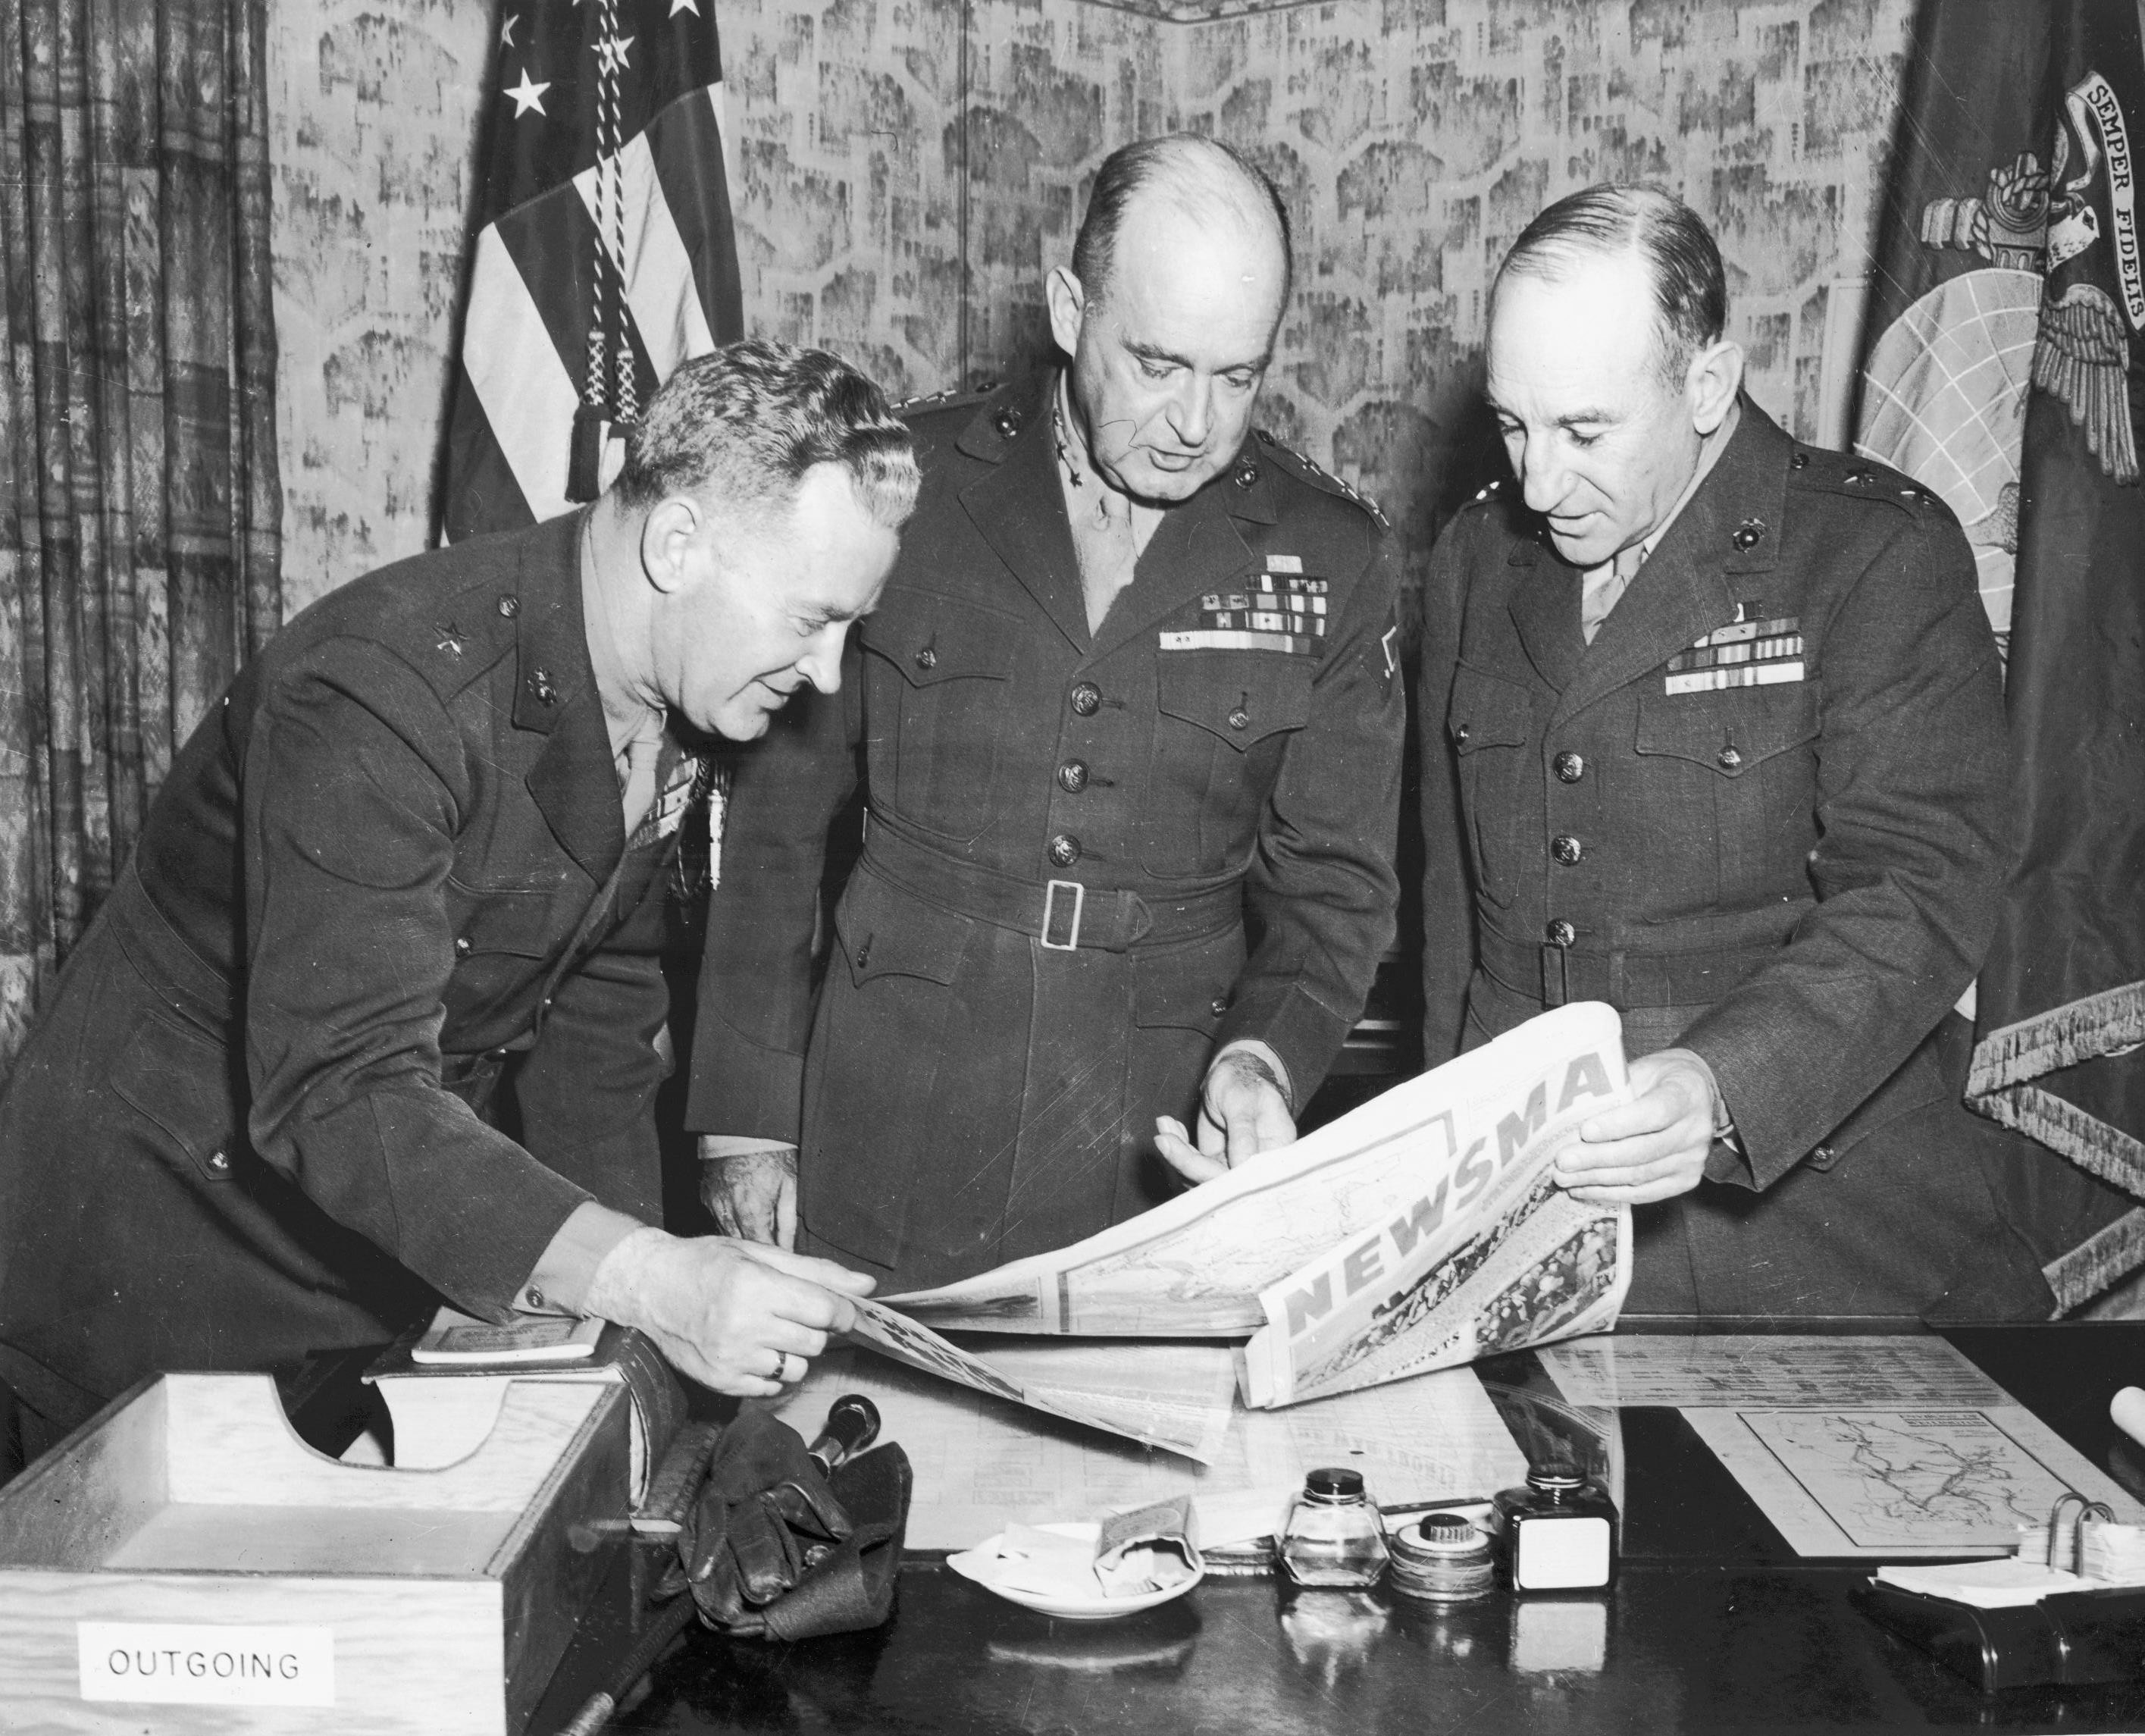 Leo Hermle, Alexander Vandegrift, and Julian Smith looking at a Newsmap, New Zealand, 21 Sep 1943